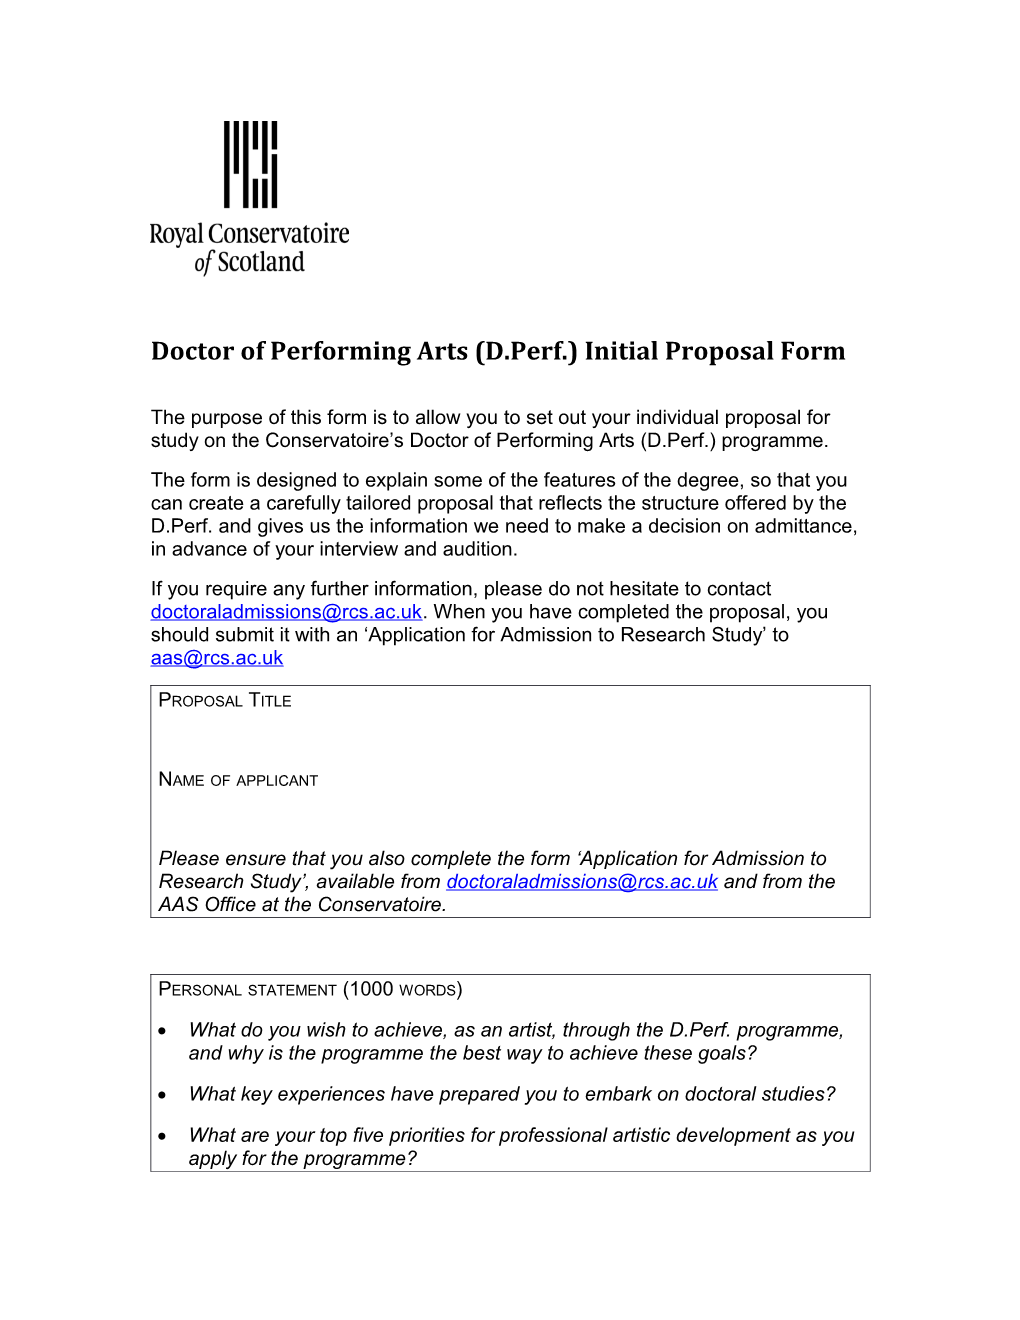 Doctor of Performing Arts (D.Perf.) Initial Proposal Form